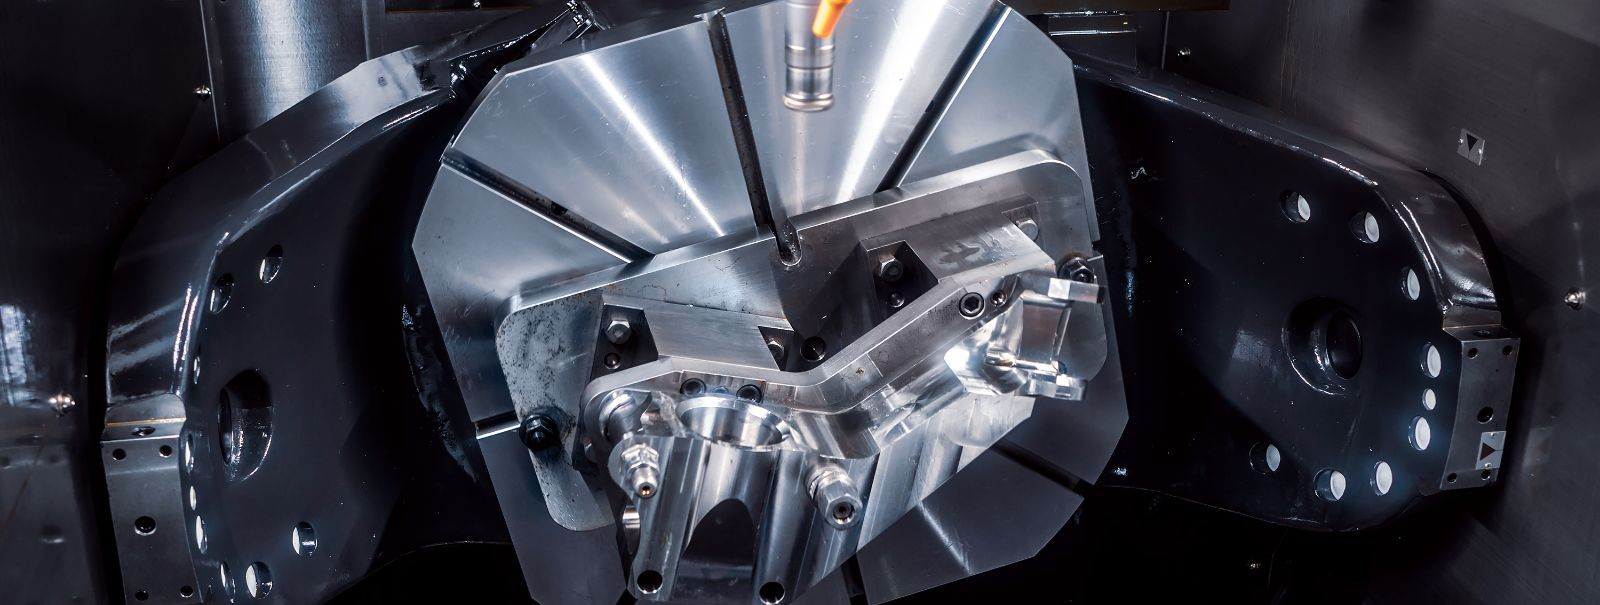 5-Axis CNC milling represents a monumental leap in manufacturing technology, integrating five axes of movement to manipulate a workpiece in various directions. 